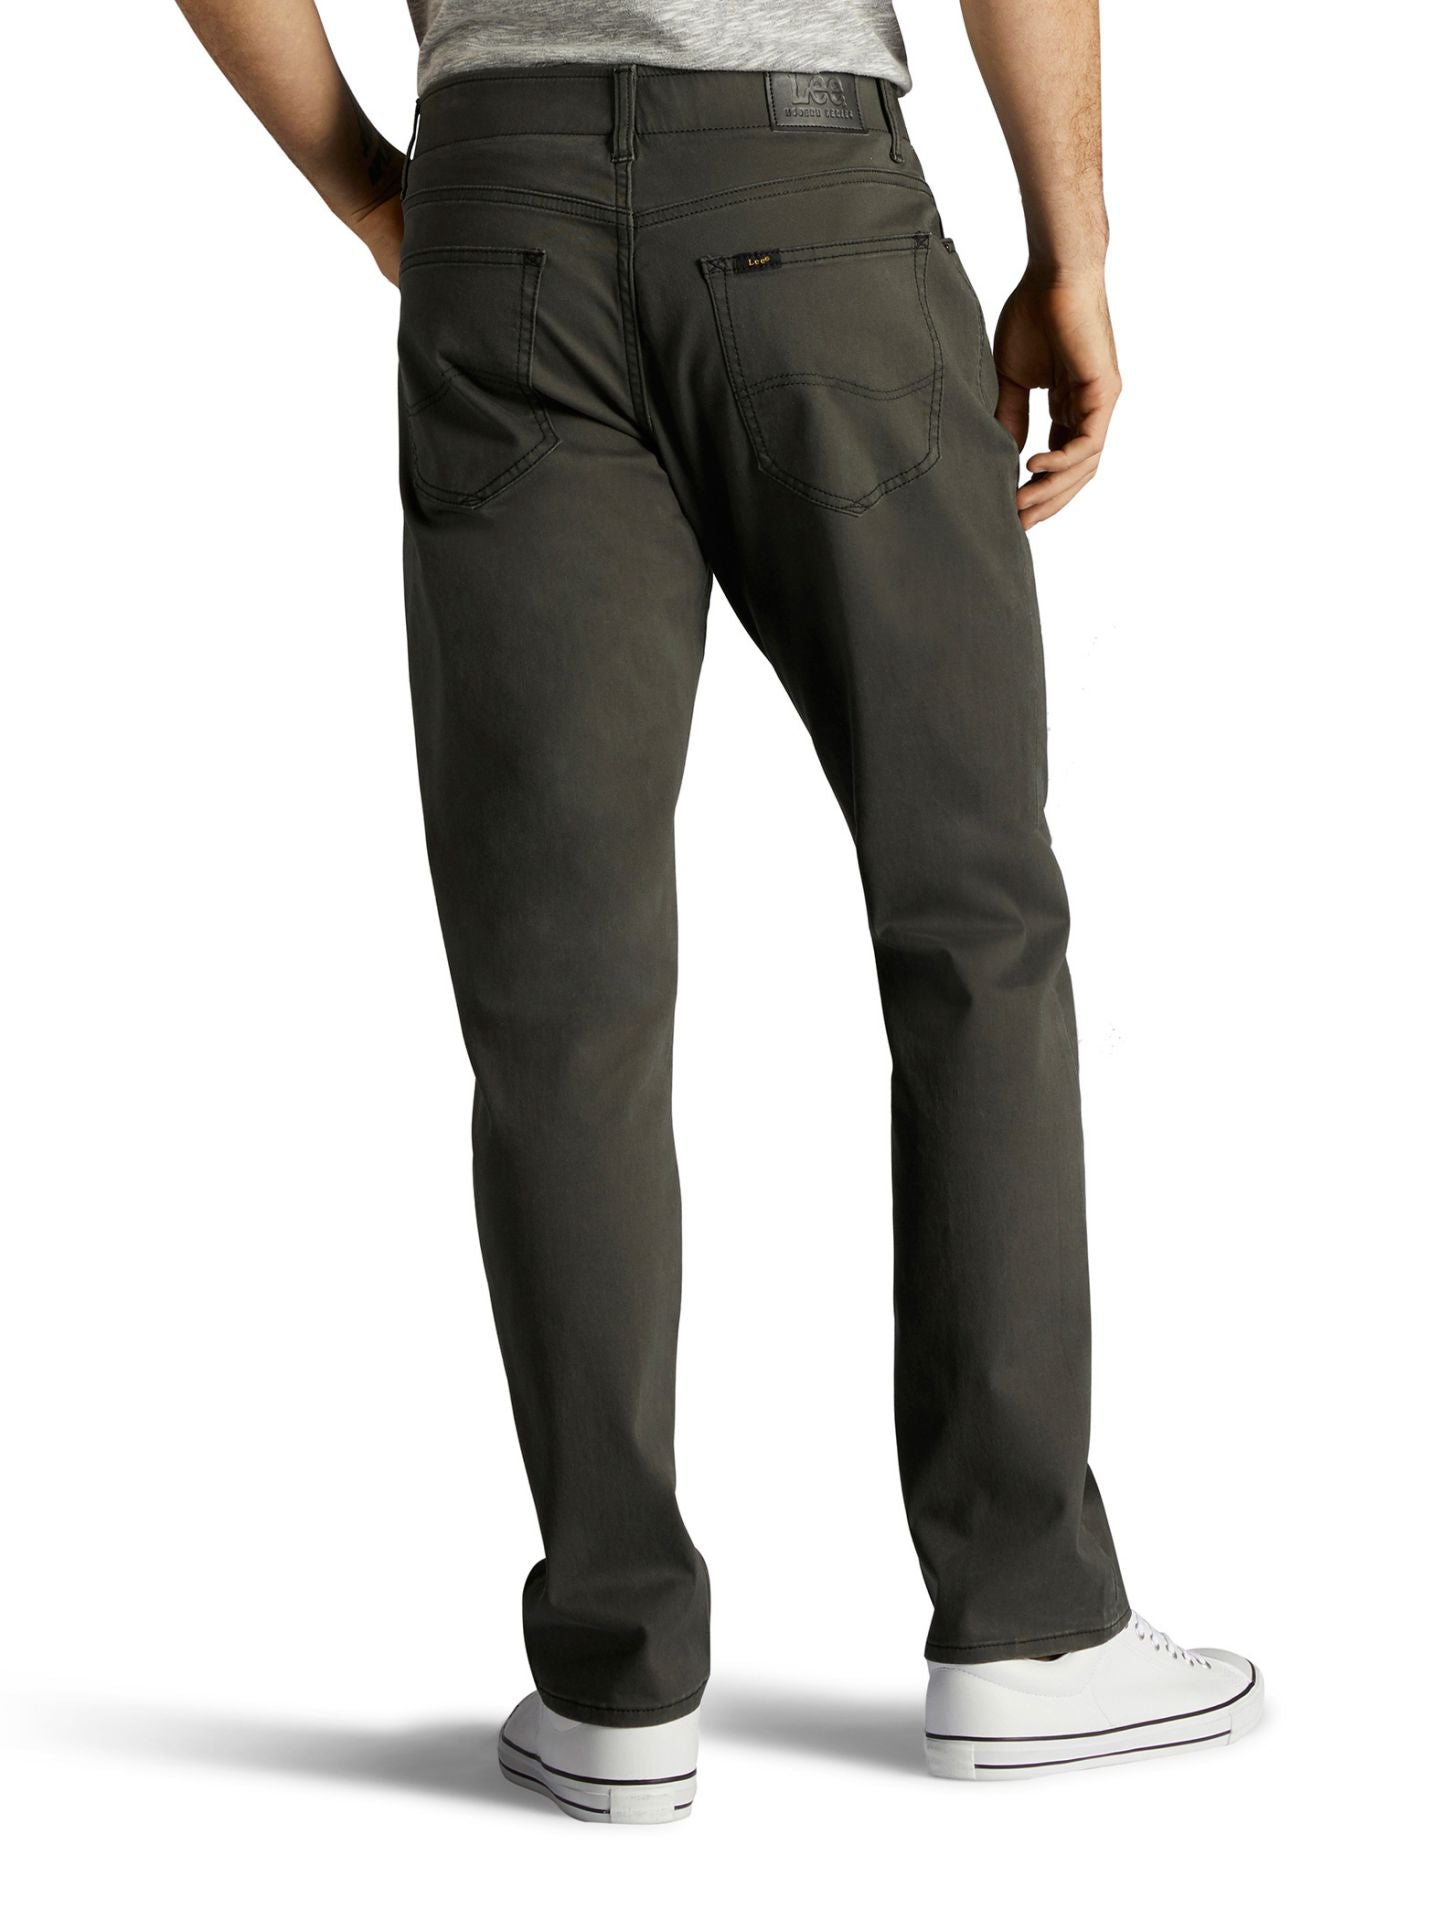 Men's Extreme Motion Athletic Fit Jeans - Dark Grey